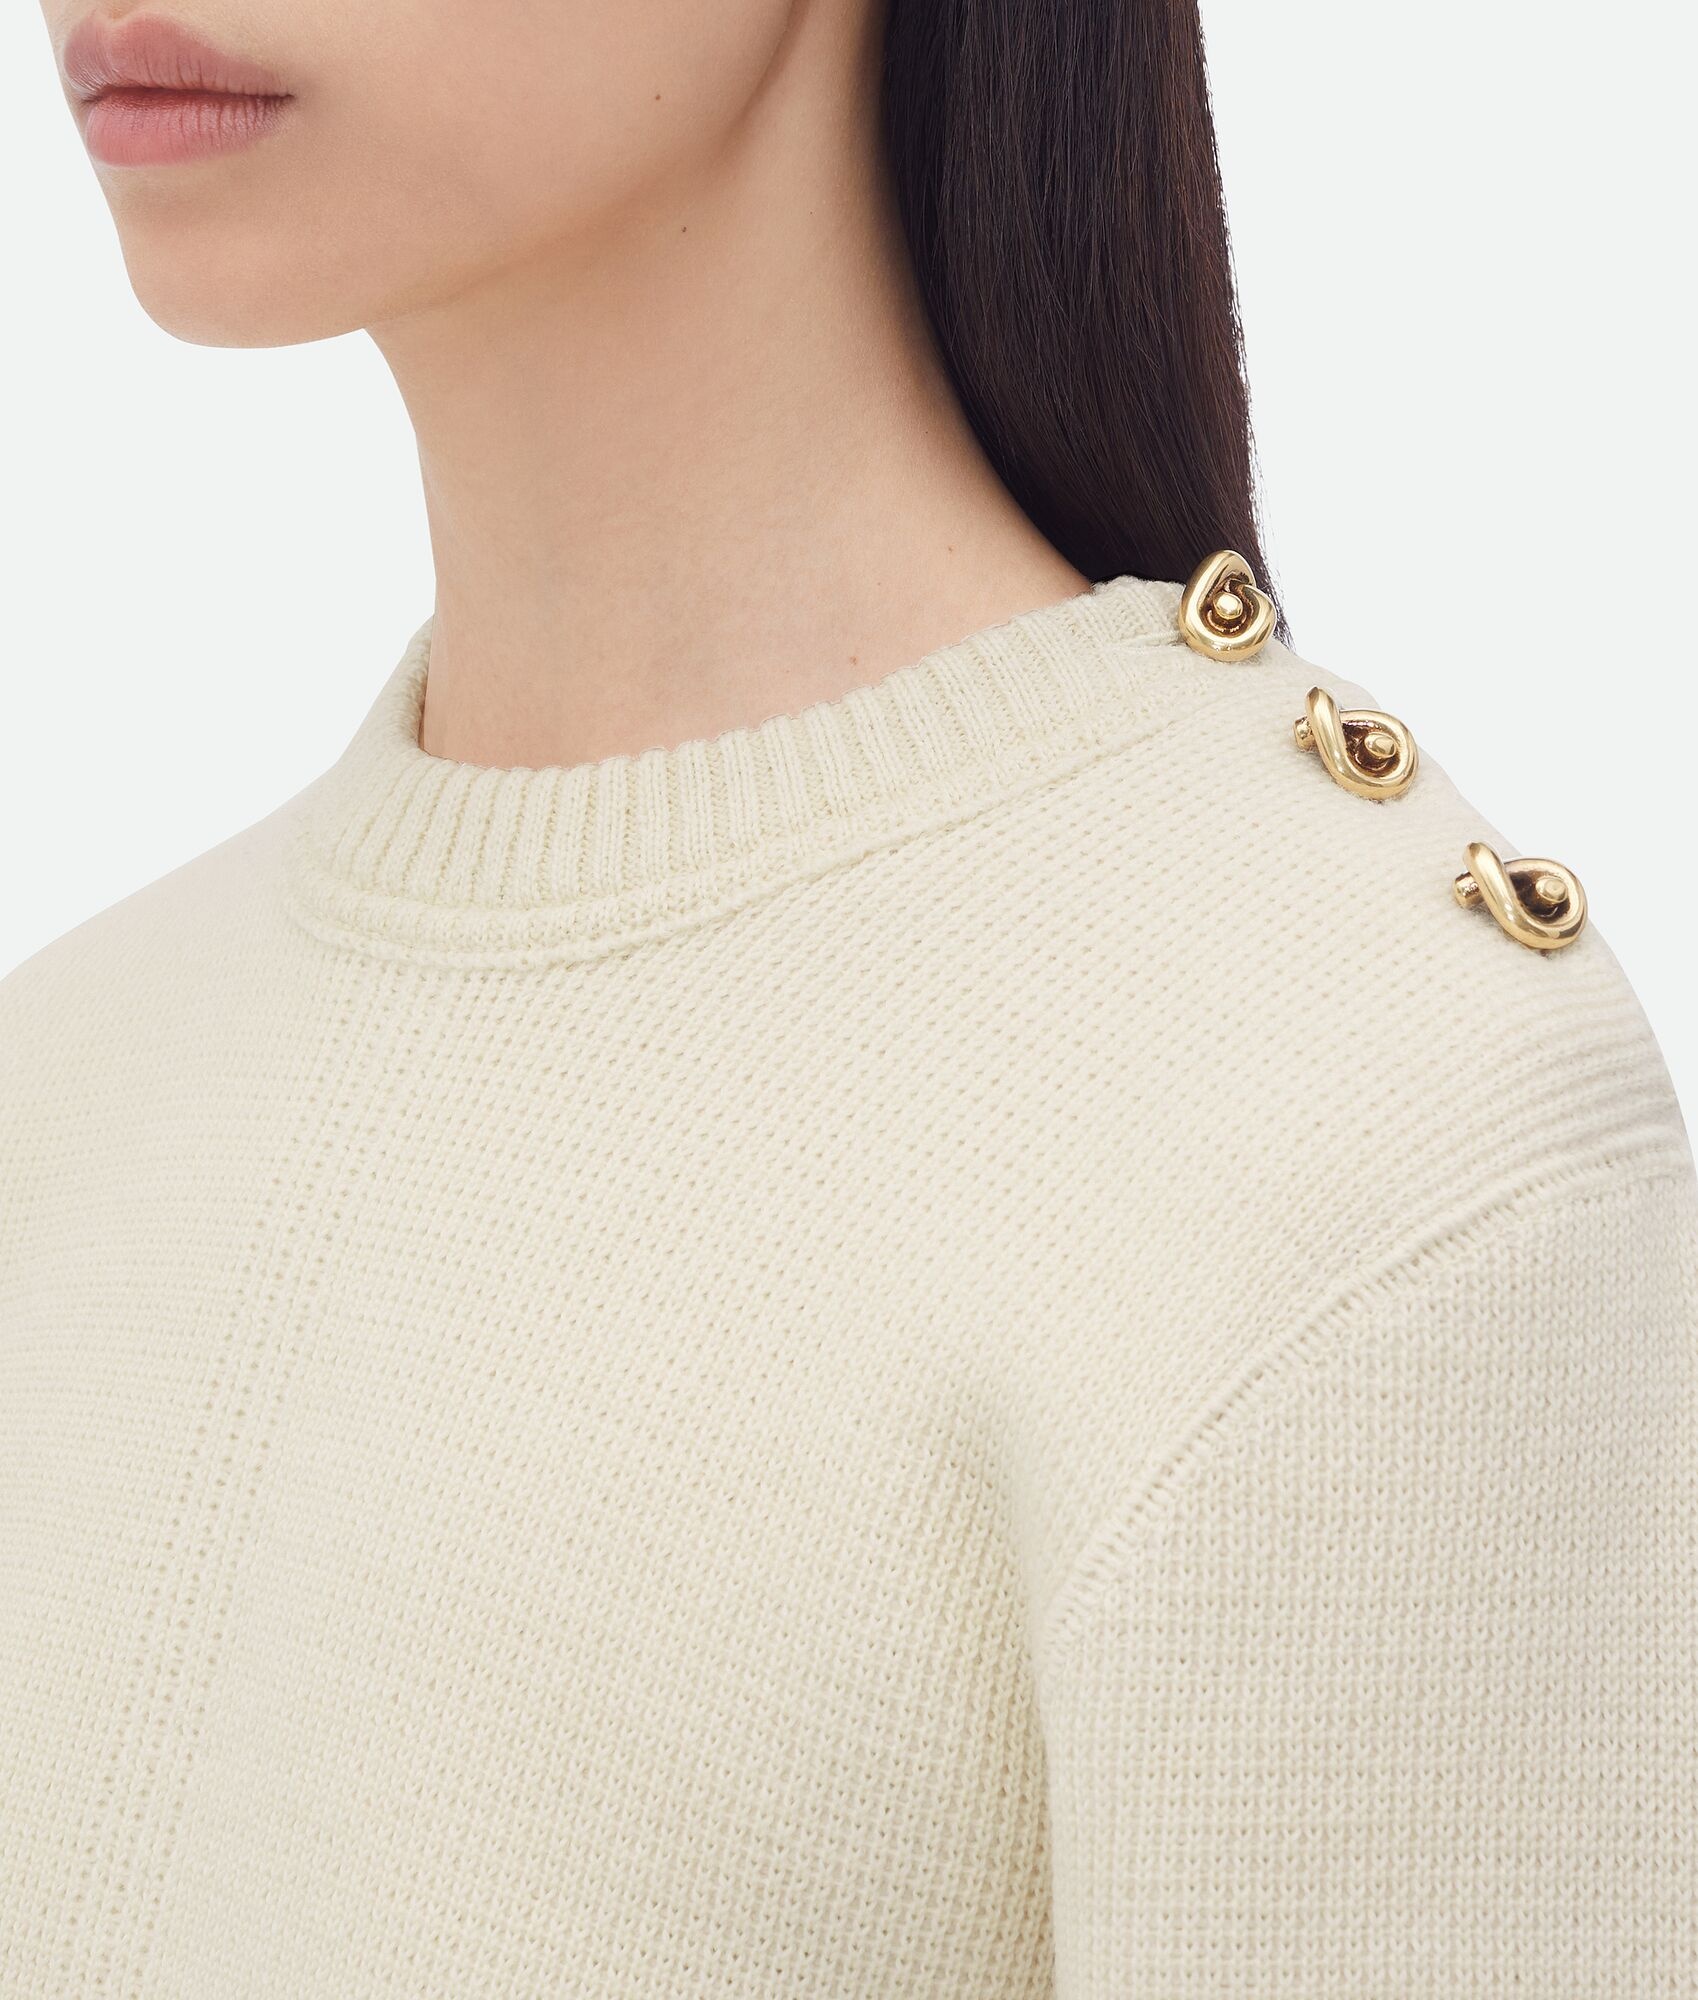 wool jumper with metal knot buttons - 4